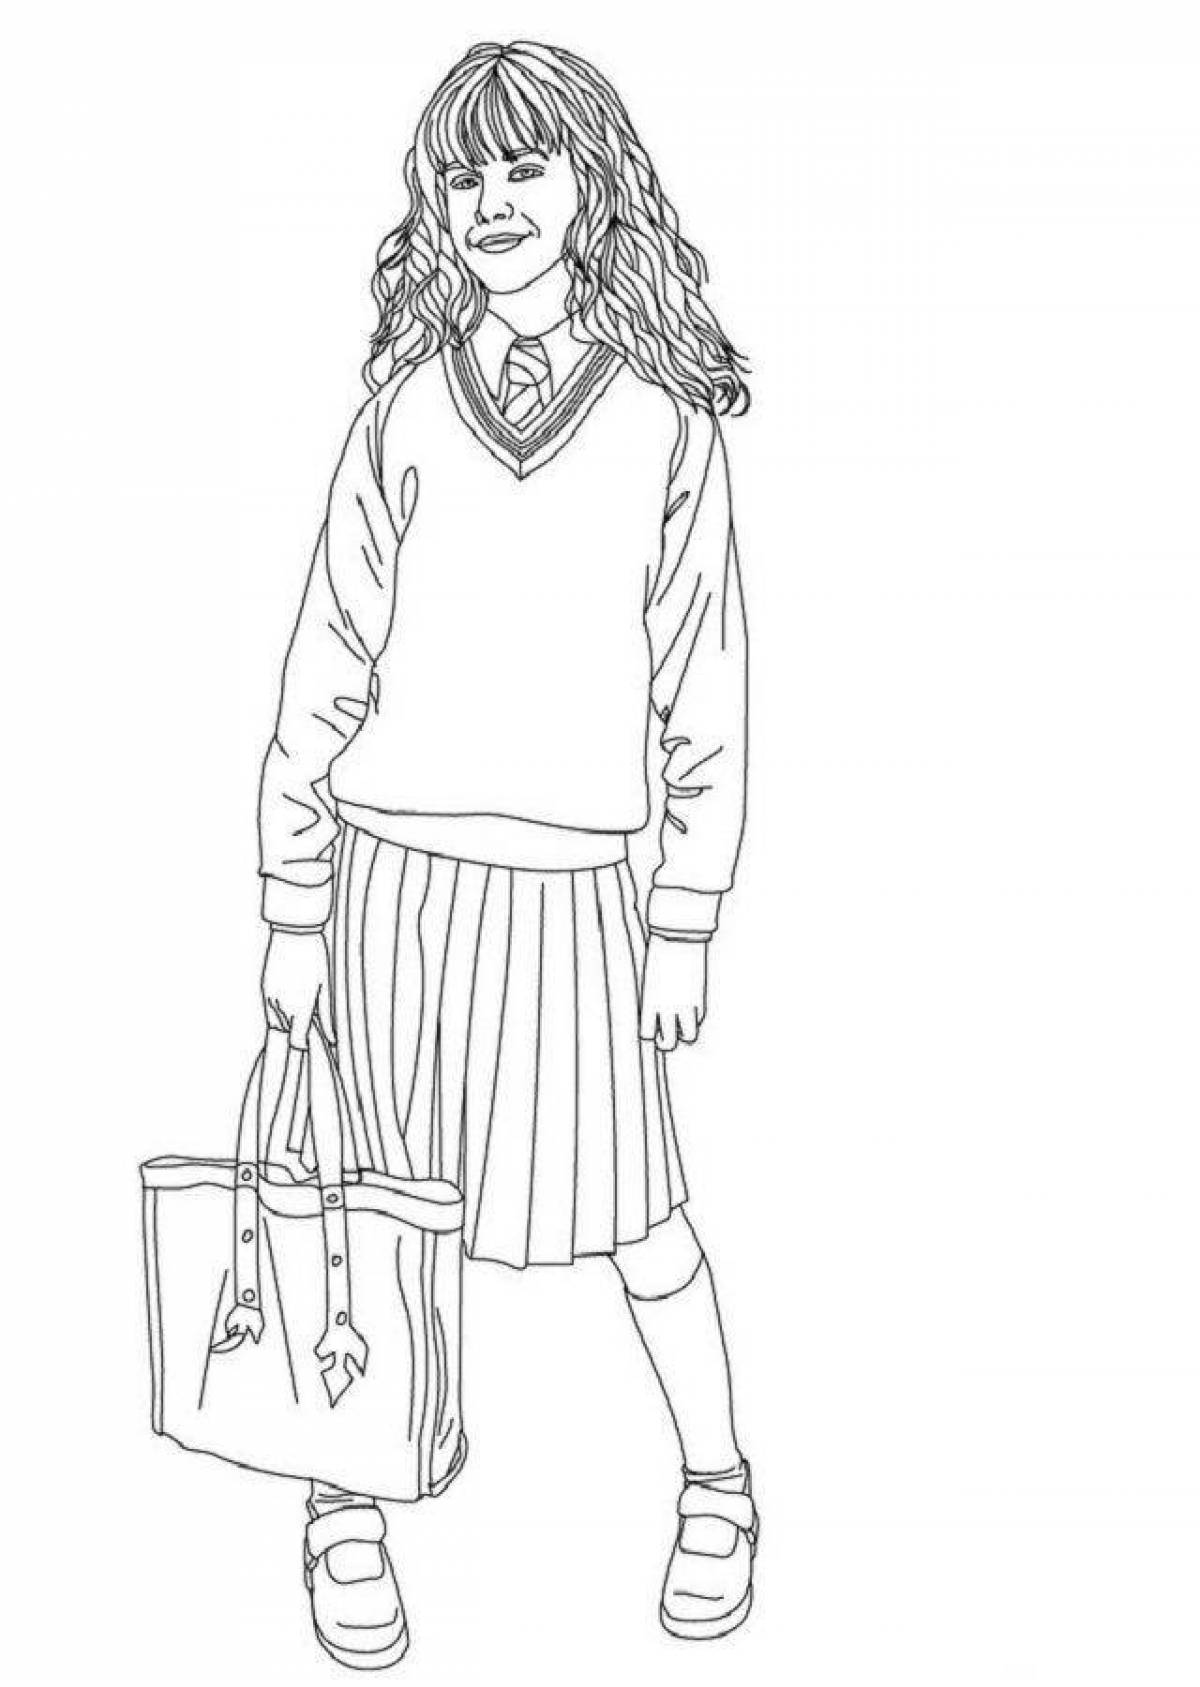 Colorful hermione granger coloring page